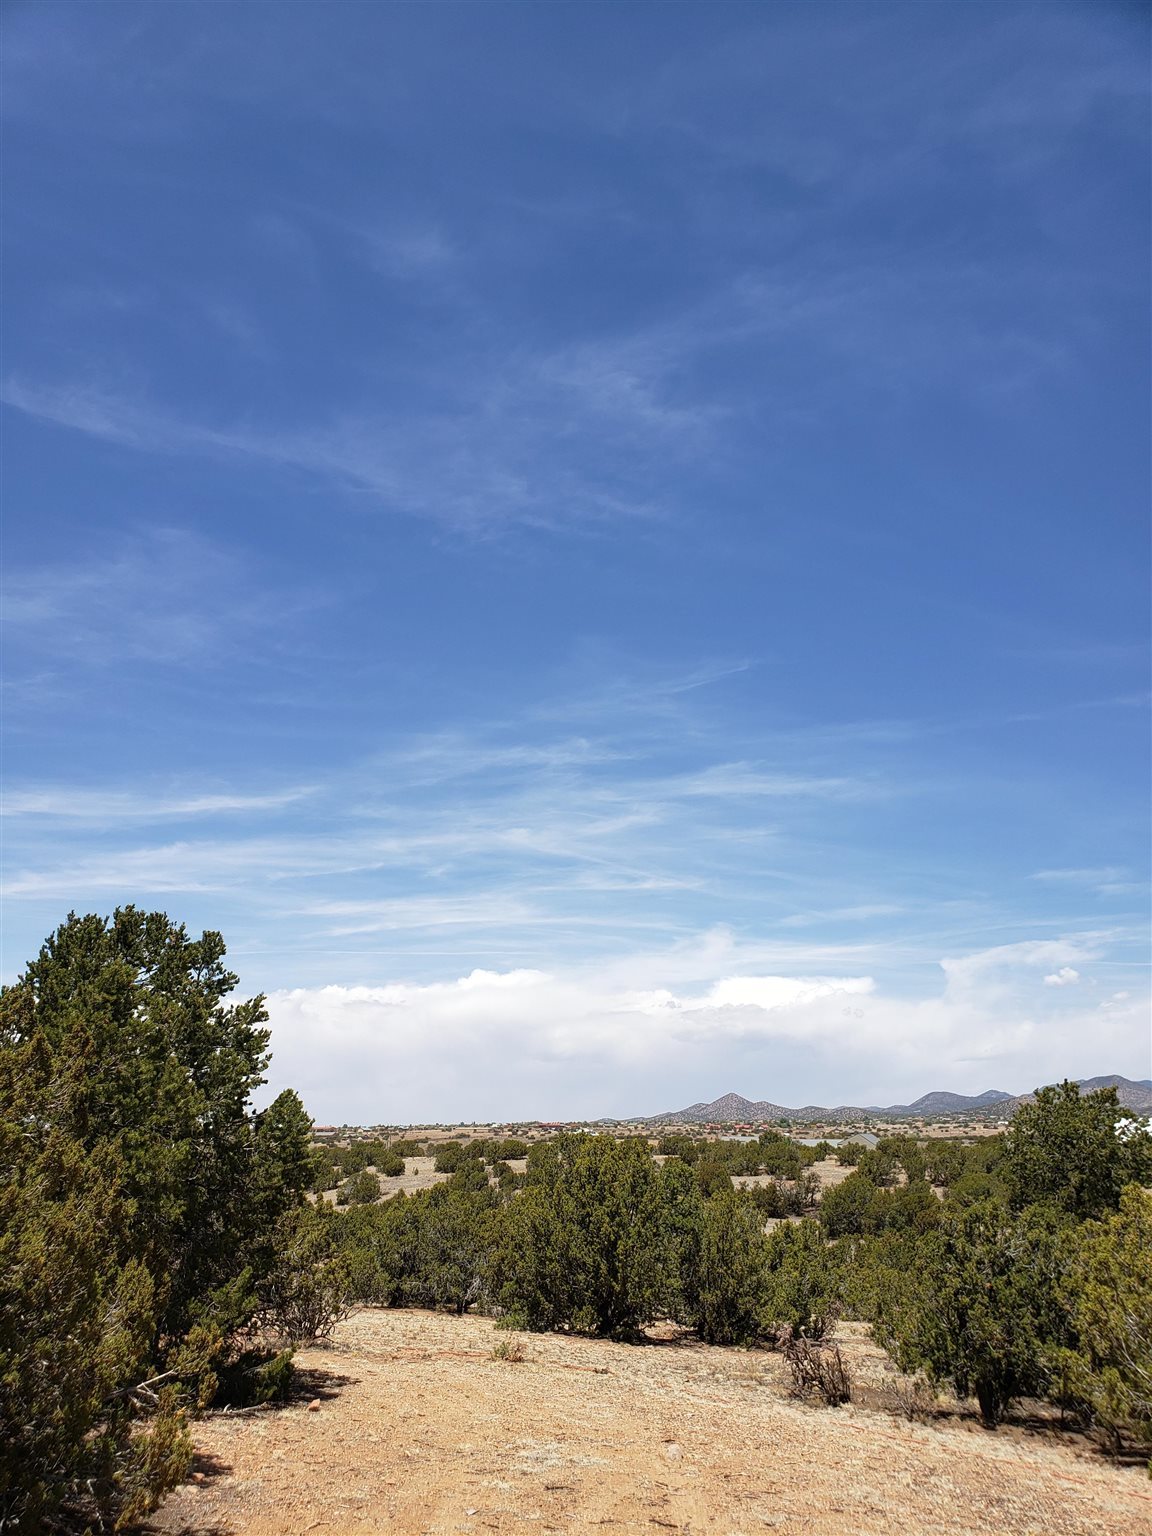 41 OLD, Lamy, New Mexico 87540, ,Land,For Sale,41 OLD,202101976